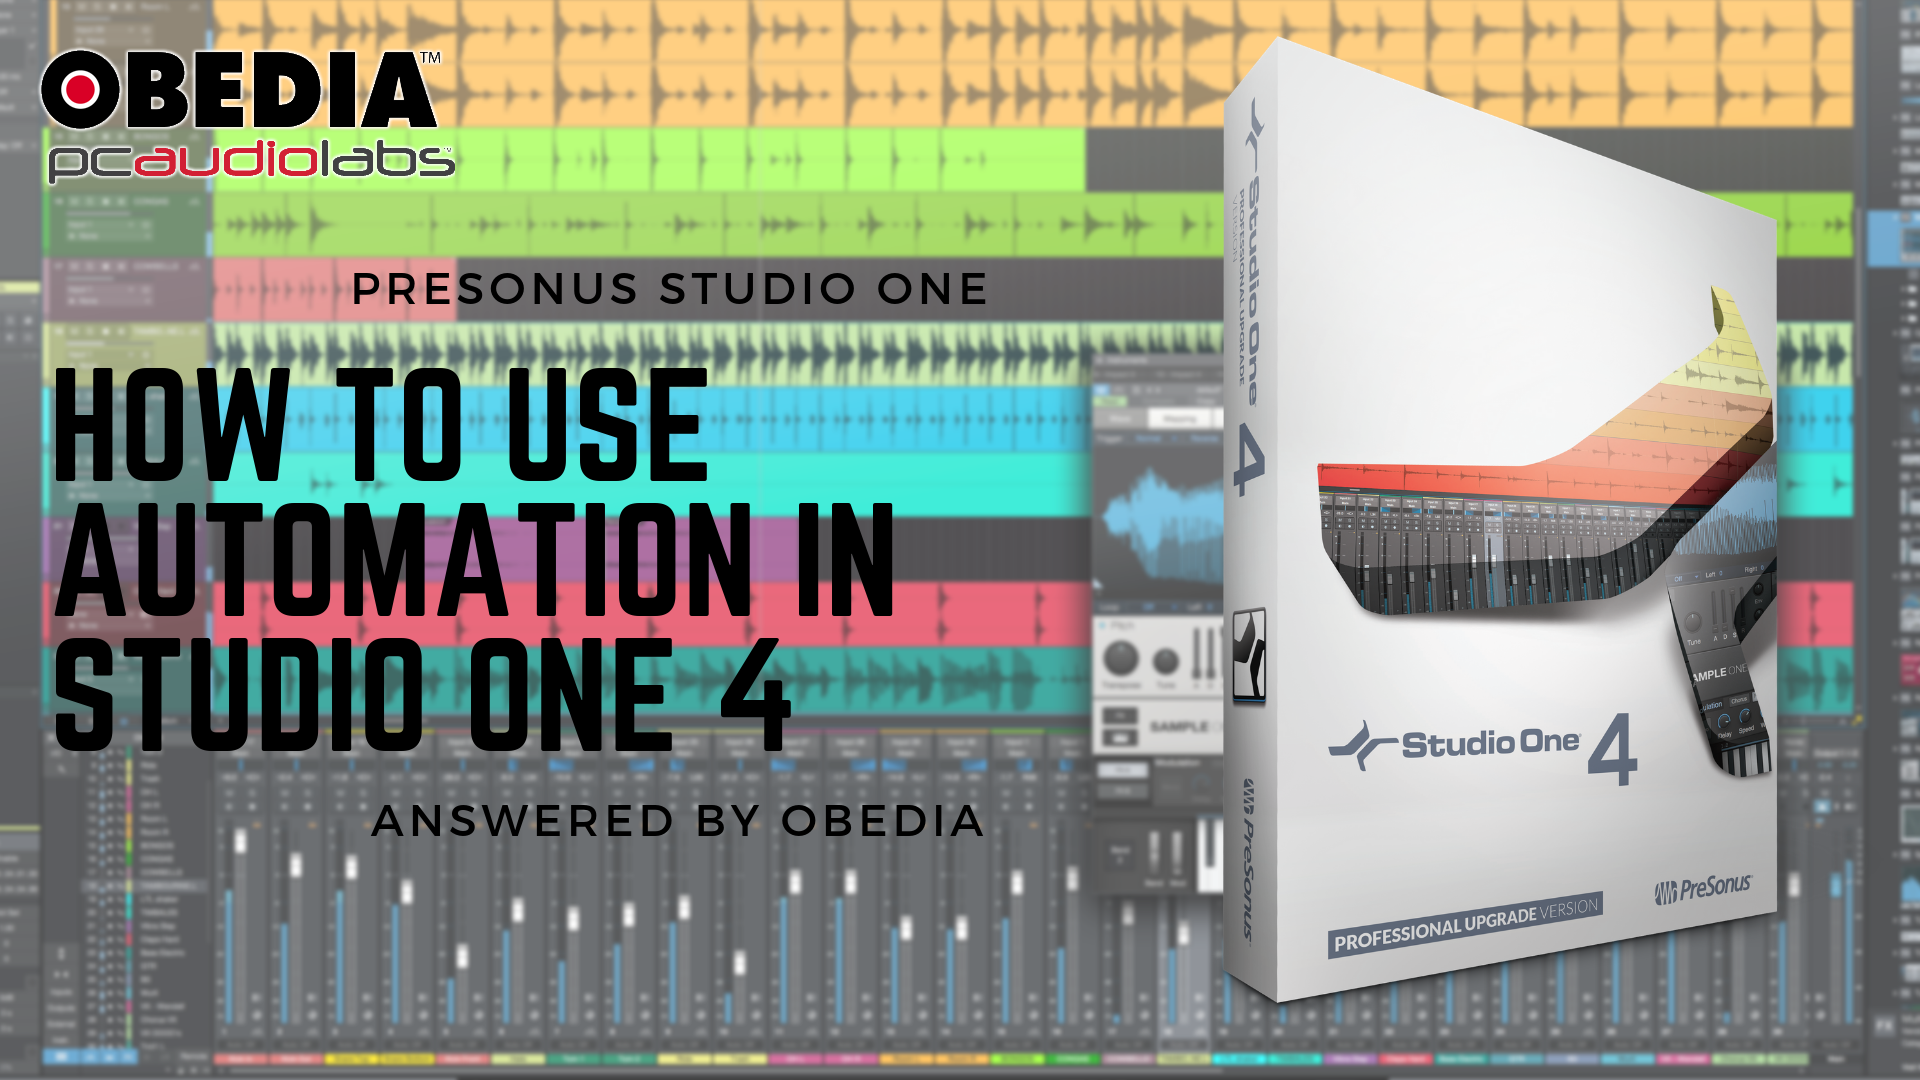 studio one instruments editor disappeared